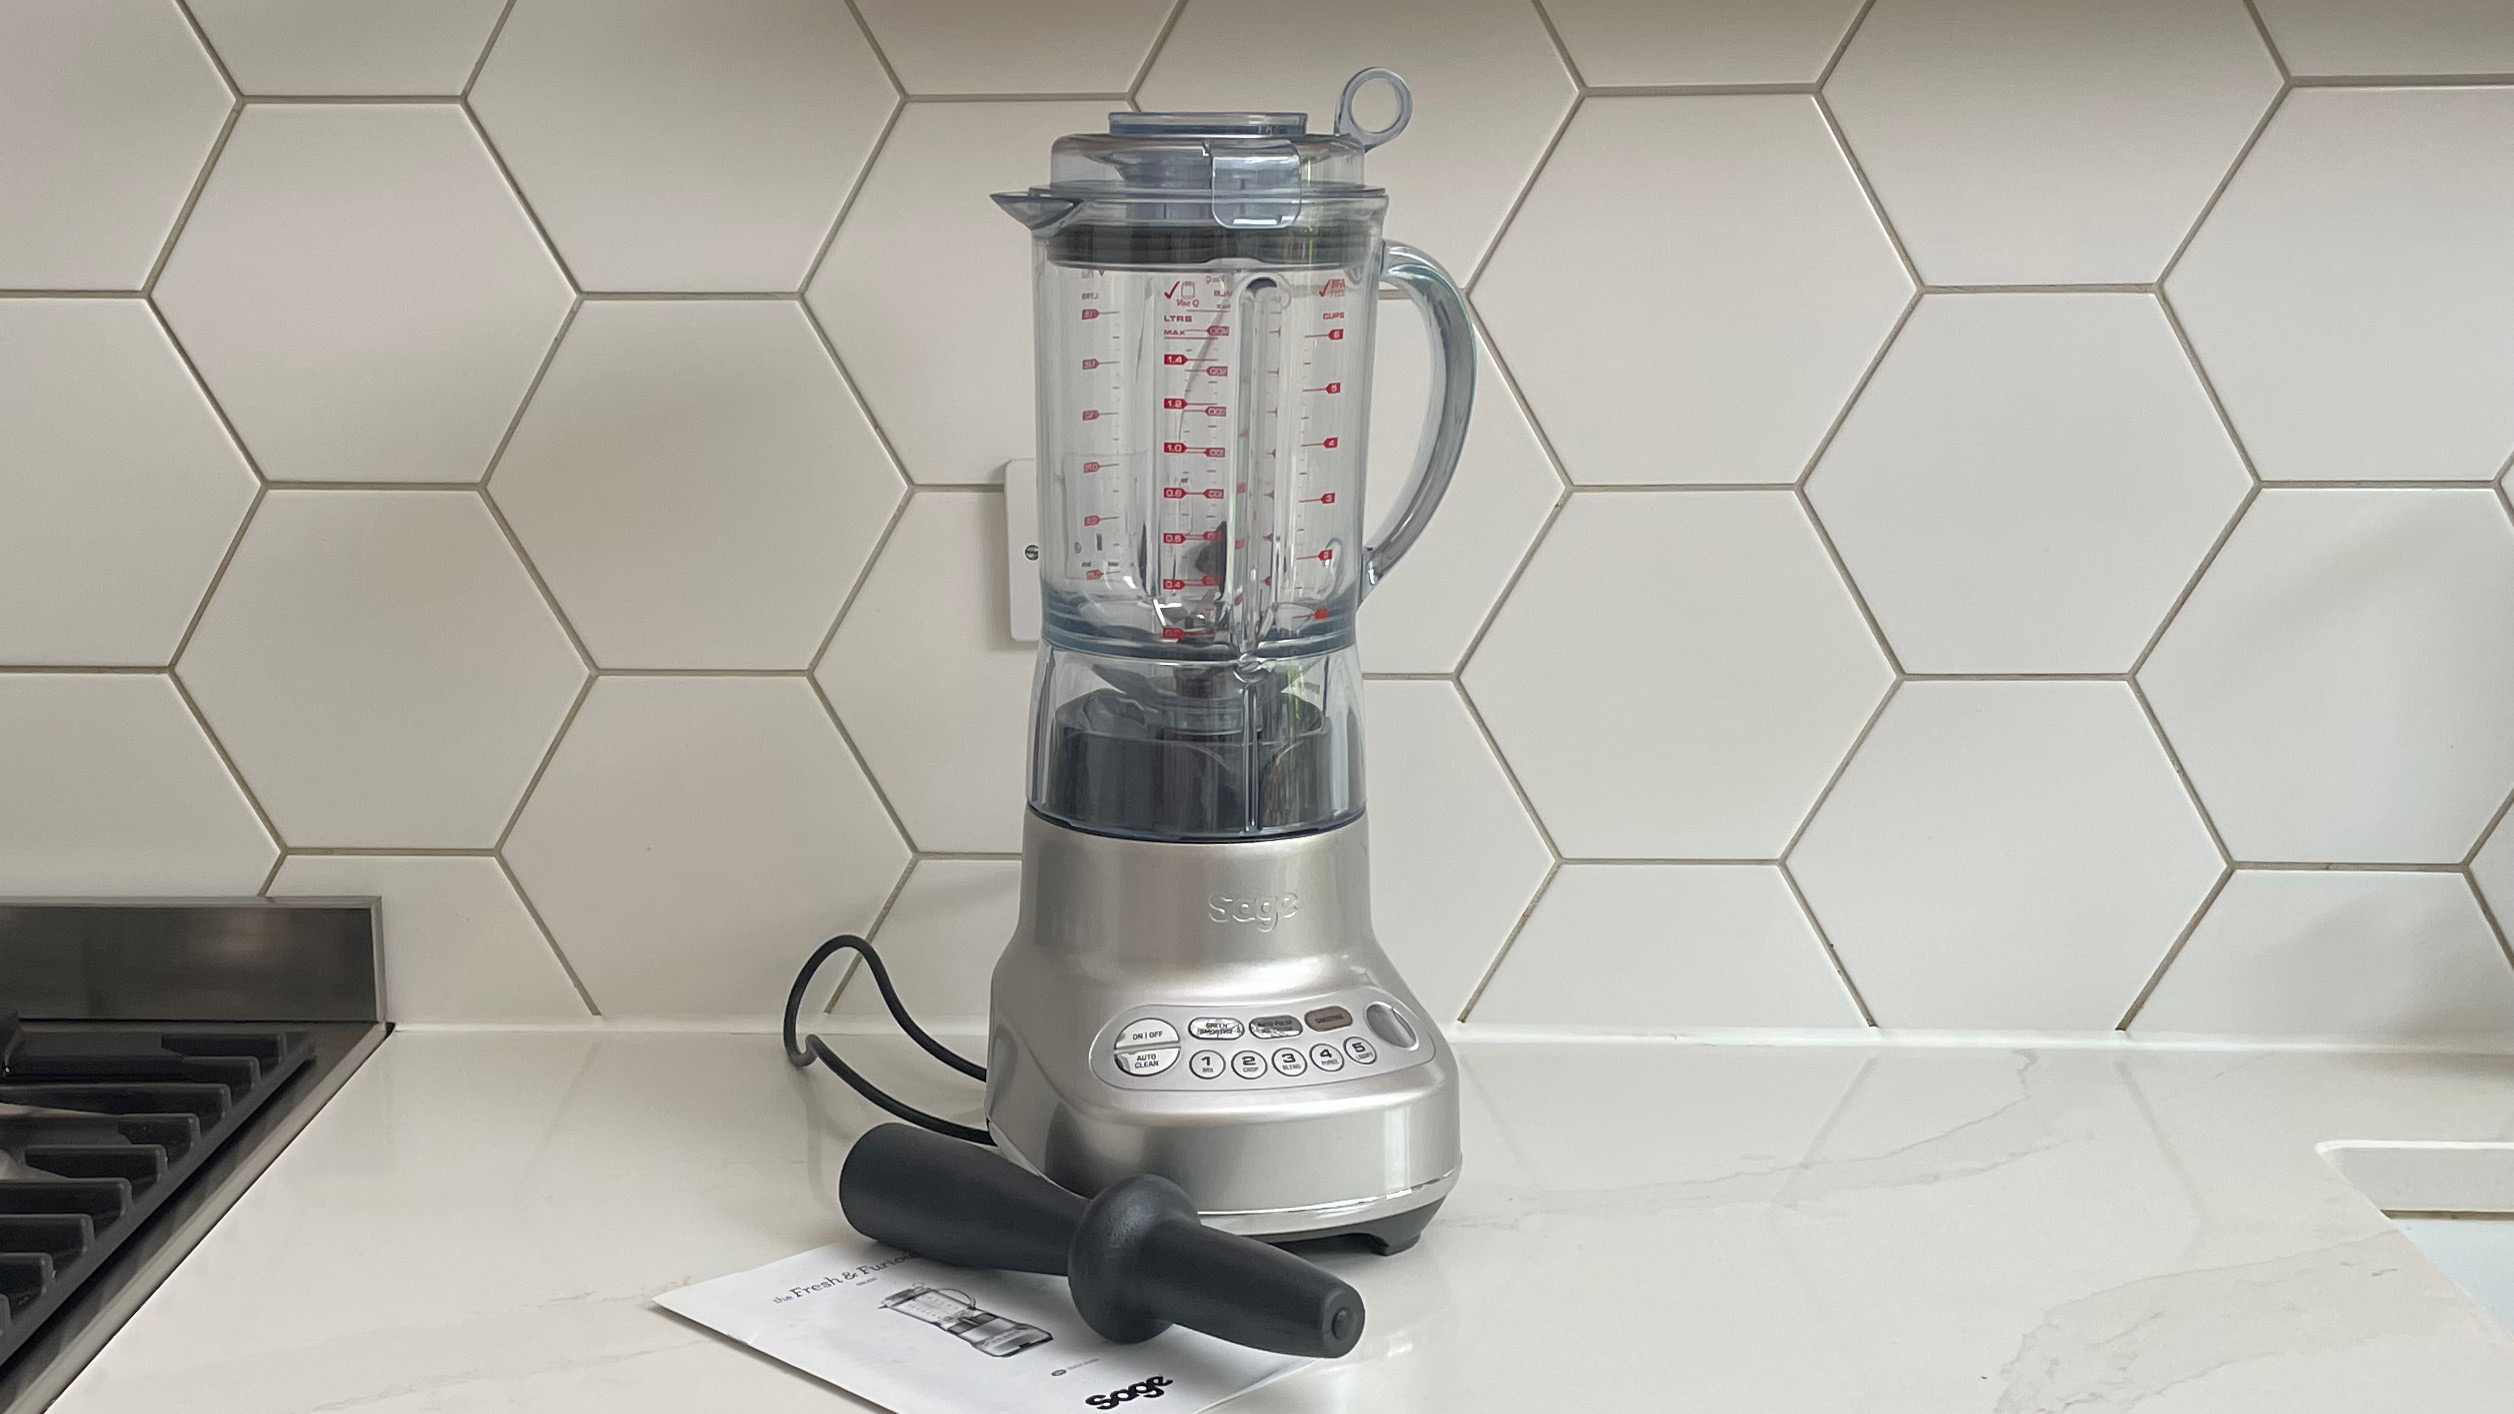 Breville the Fresh & Furious blender on a kitchen countertop